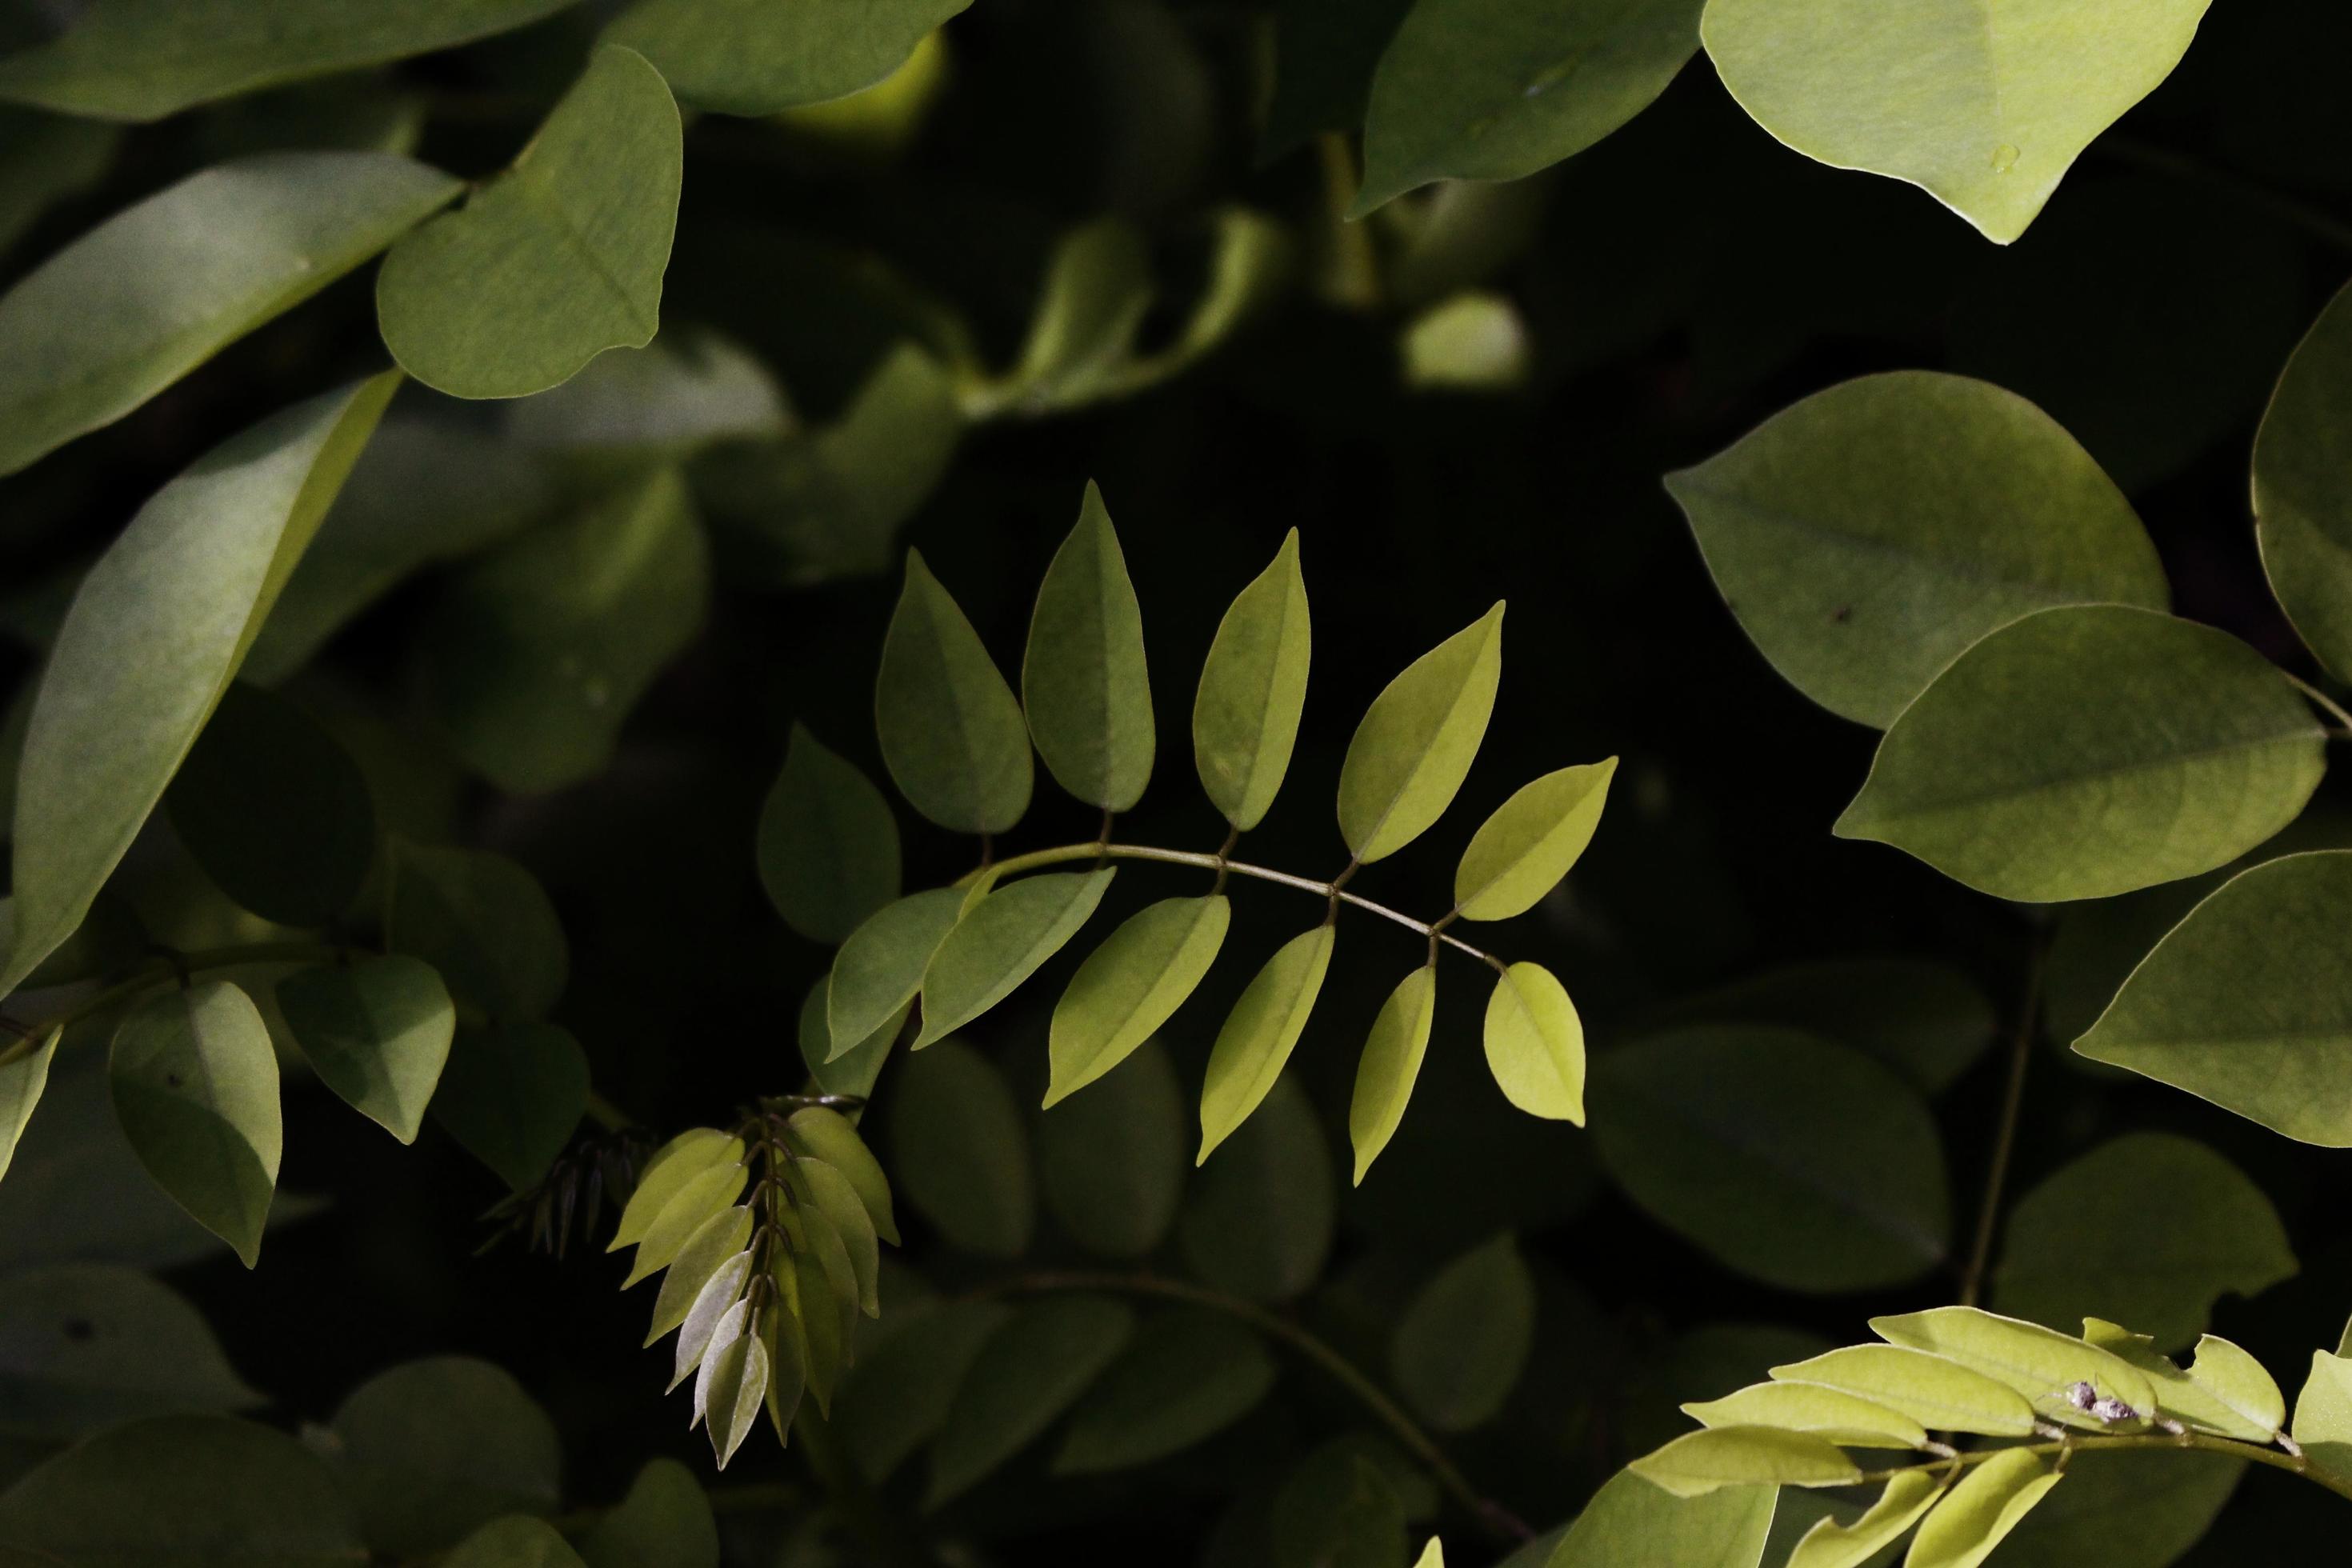 Photo of a liar plant with lush leaves with a concept that is seen when viewed, usually used for wallpaper and background